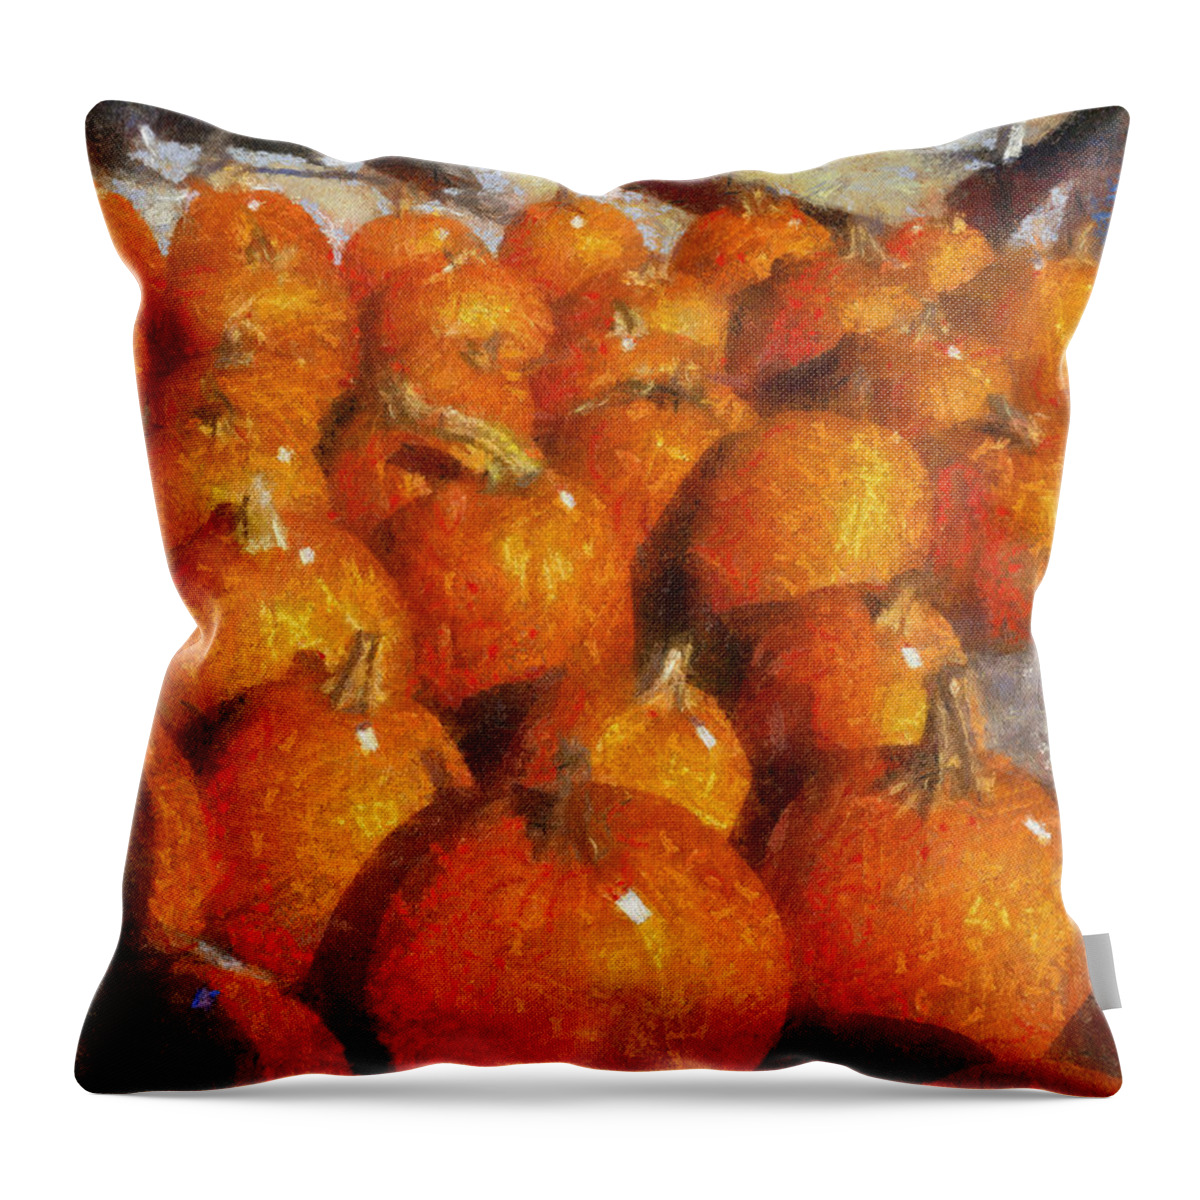 Pumpkin Throw Pillow featuring the photograph Pumpkins Photo Art 02 by Thomas Woolworth